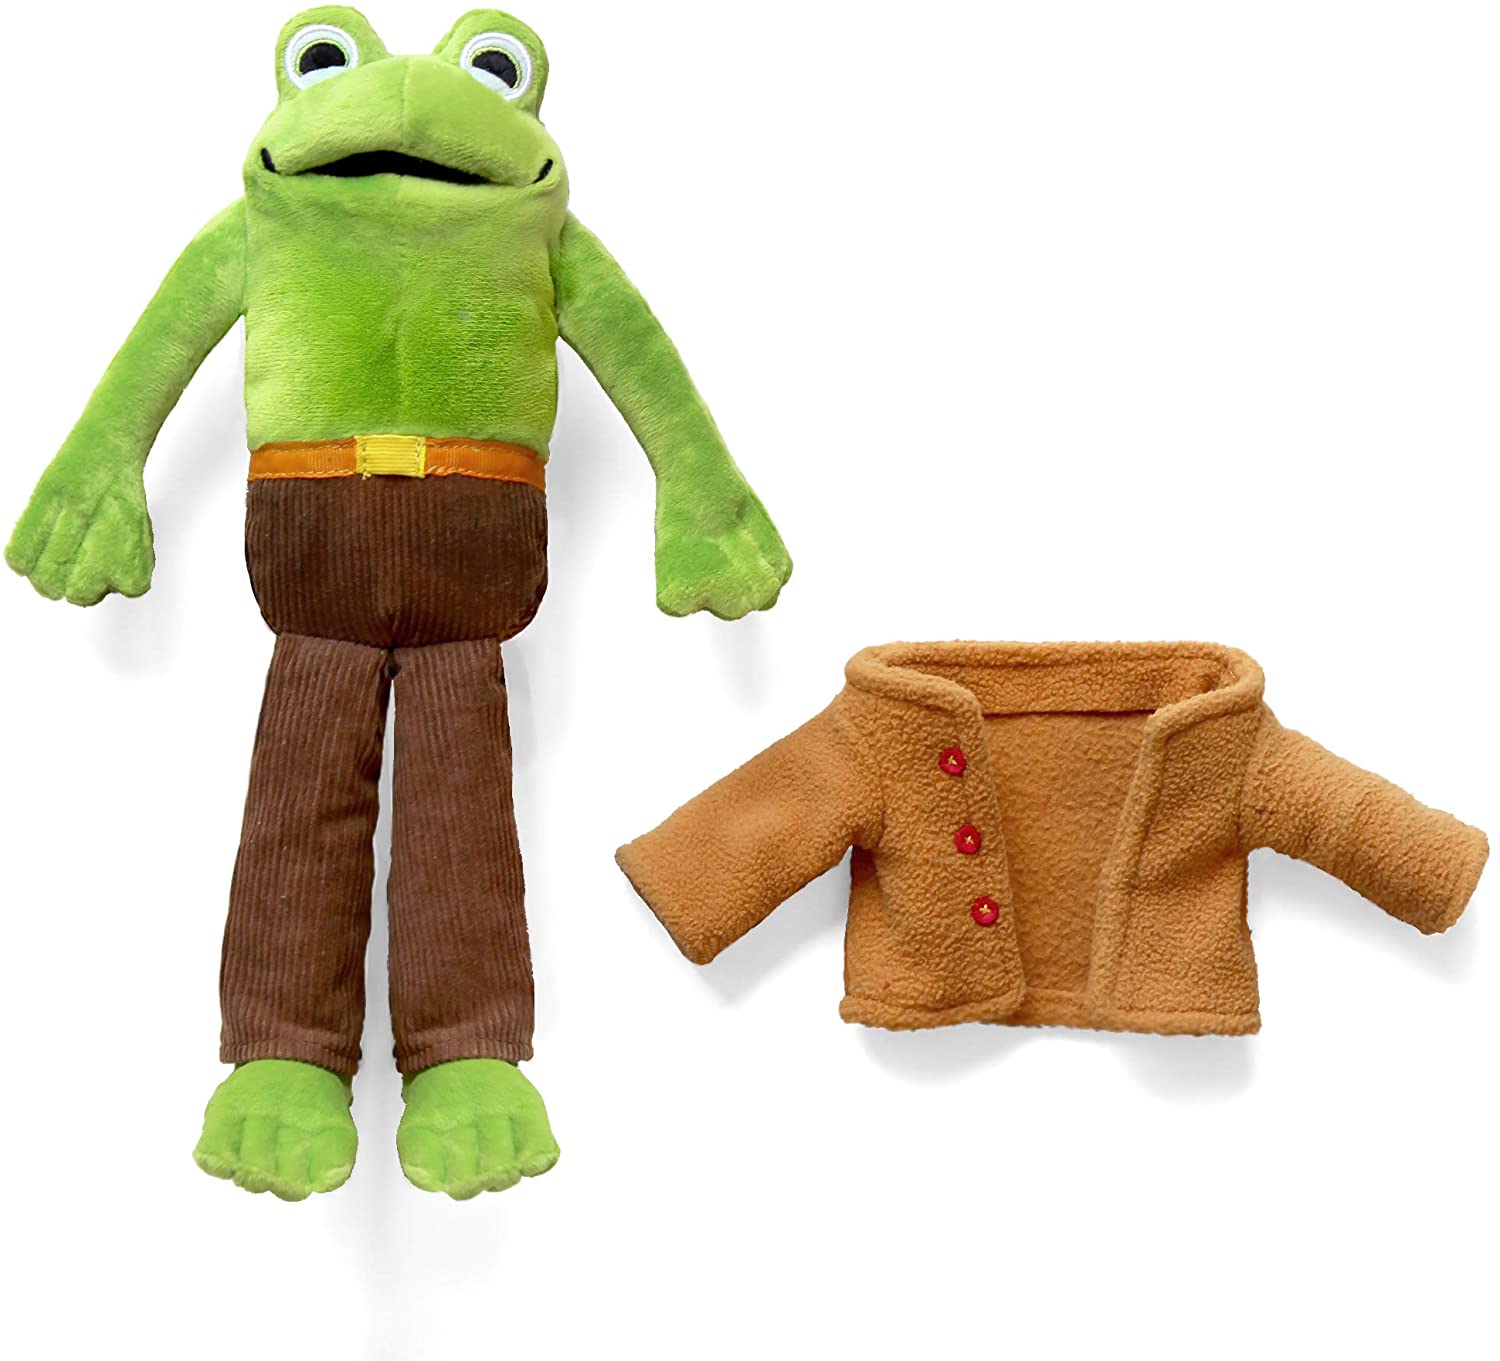 plush frog doll with its jacket next to him on a white background.